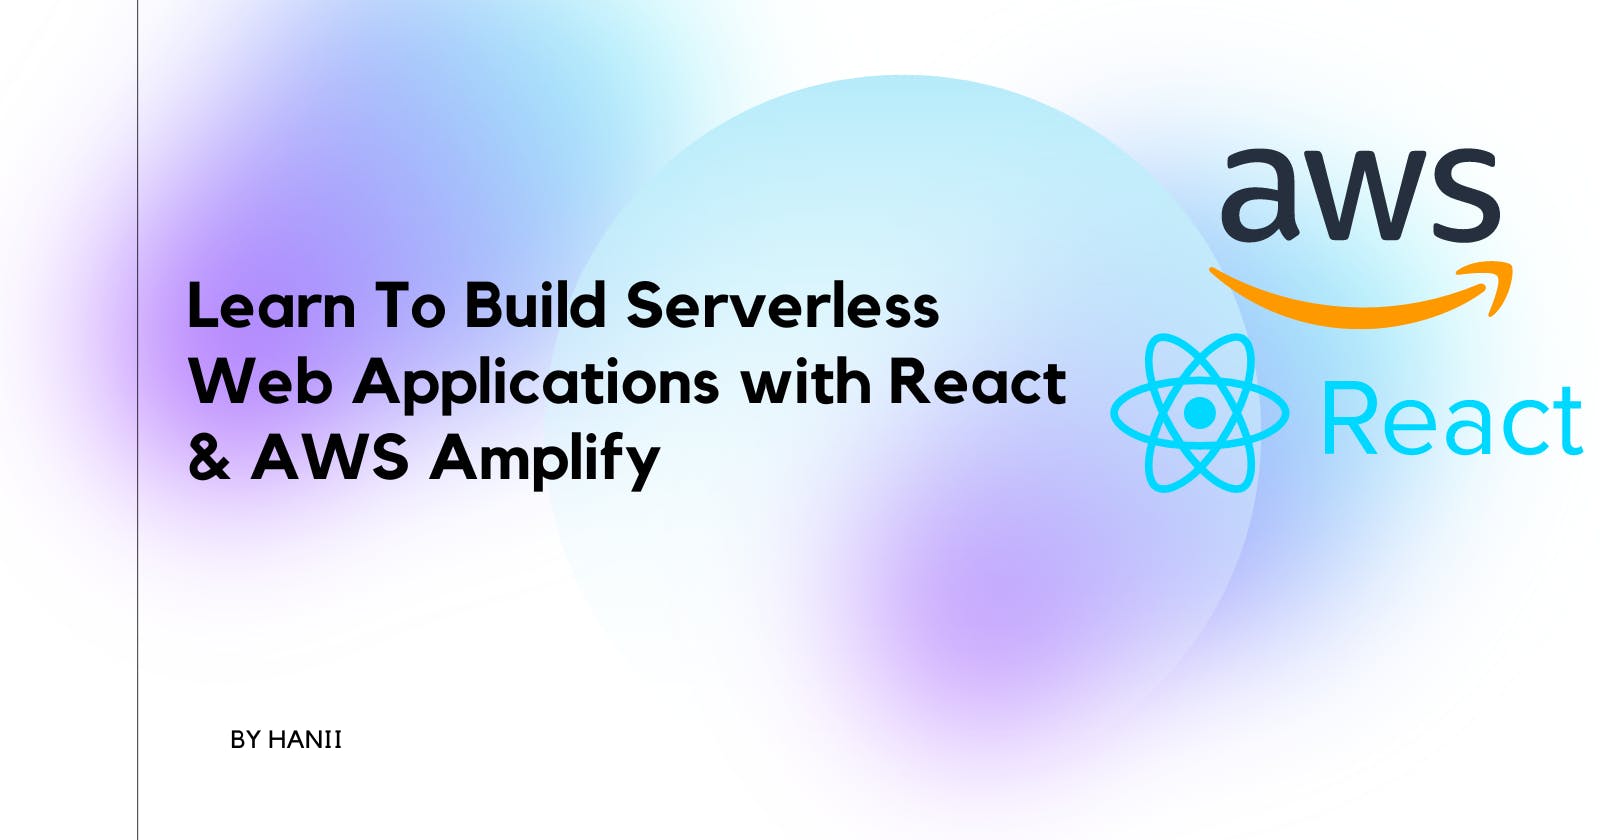 Learn To Build Serverless Web Applications with React & AWS Amplify